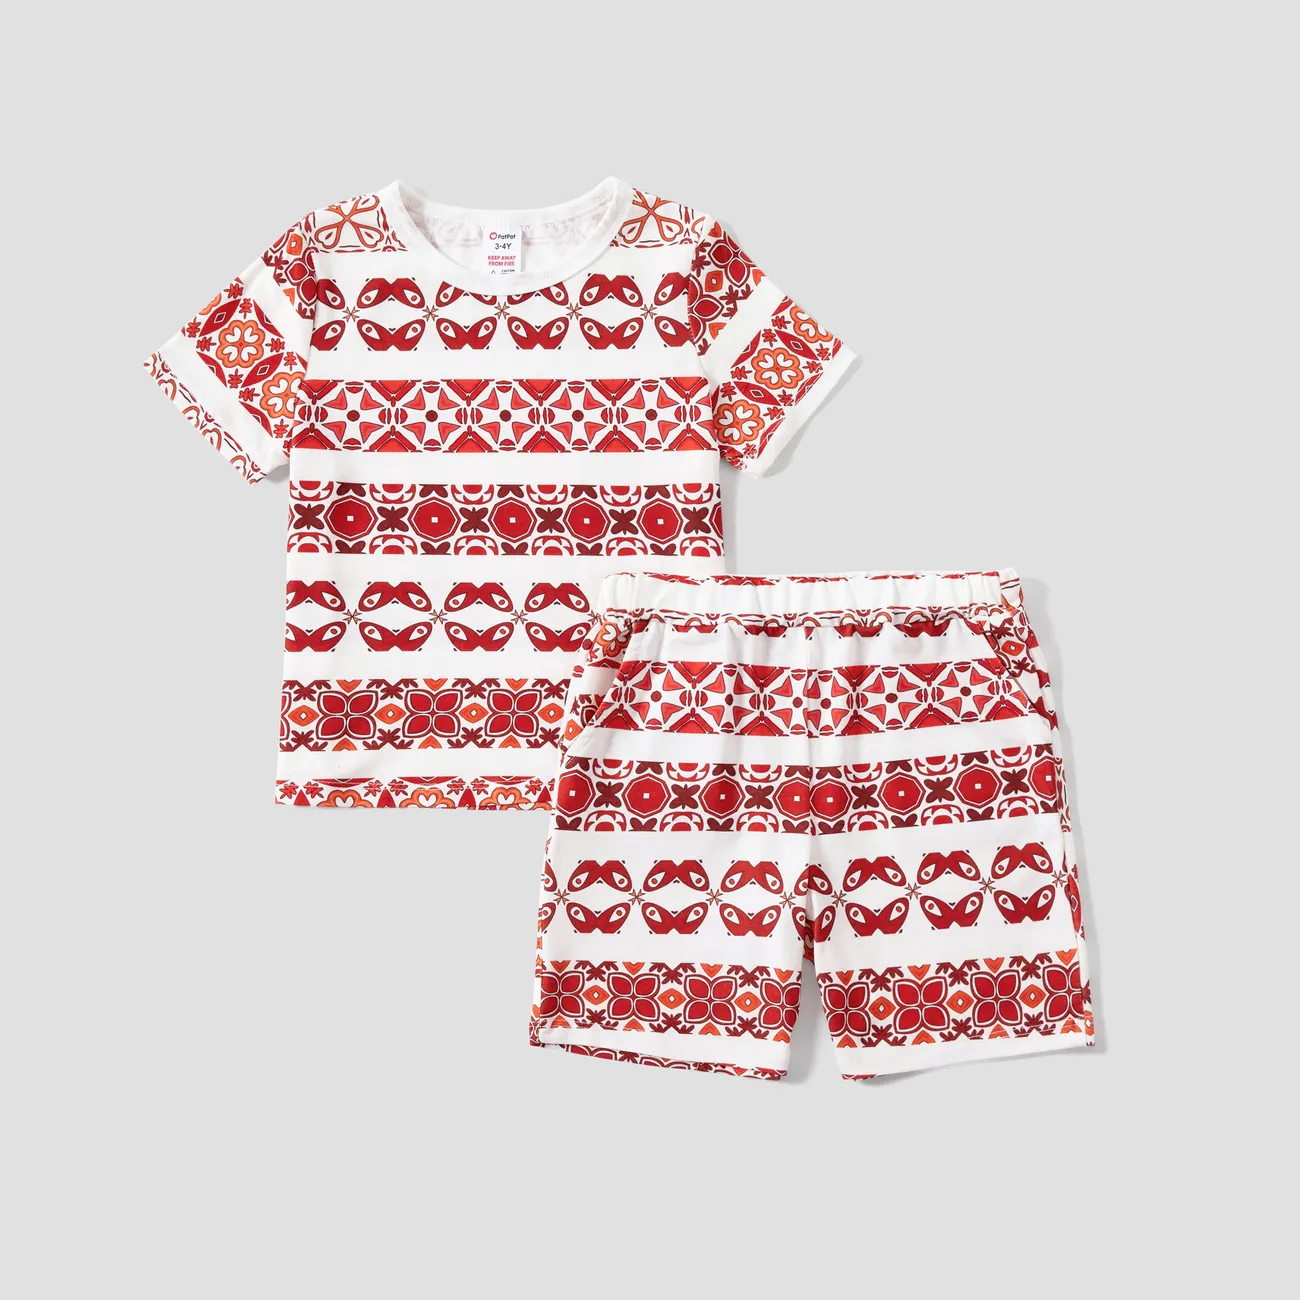 Family Matching Fair Isle Printed Short-Sleeve Top and Pocketed Shorts Pajamas Sets (Flame Resistant) Red big image 1